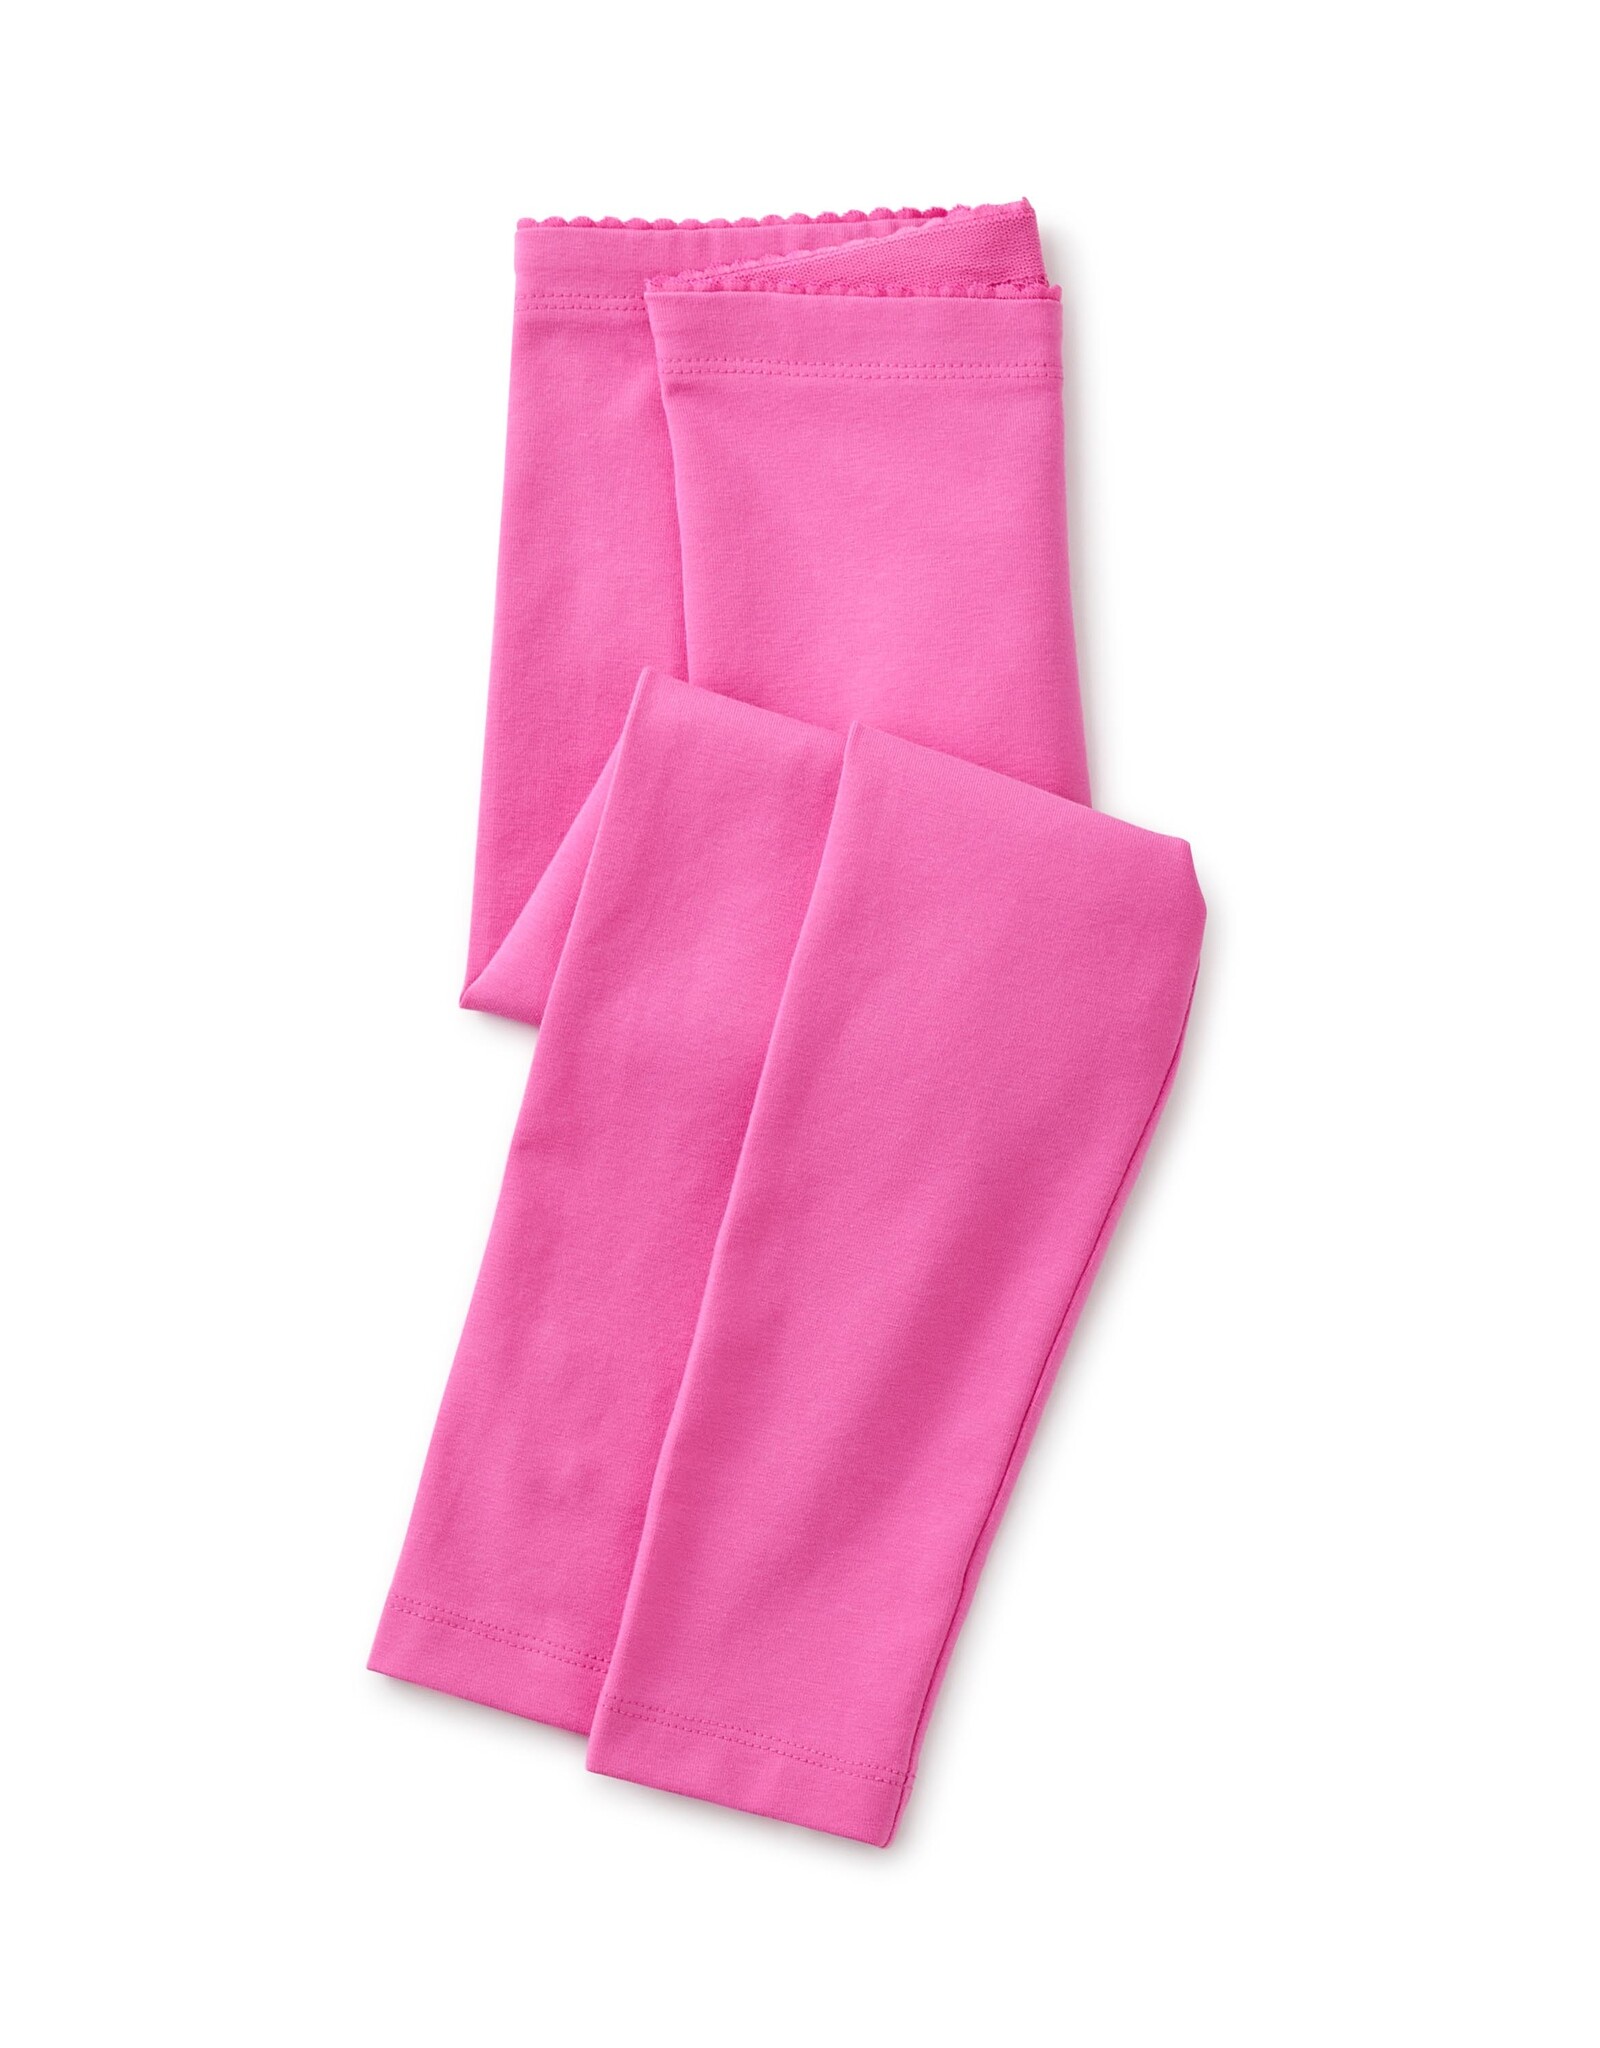 Tea Collection Solid Leggings-Carousel Pink